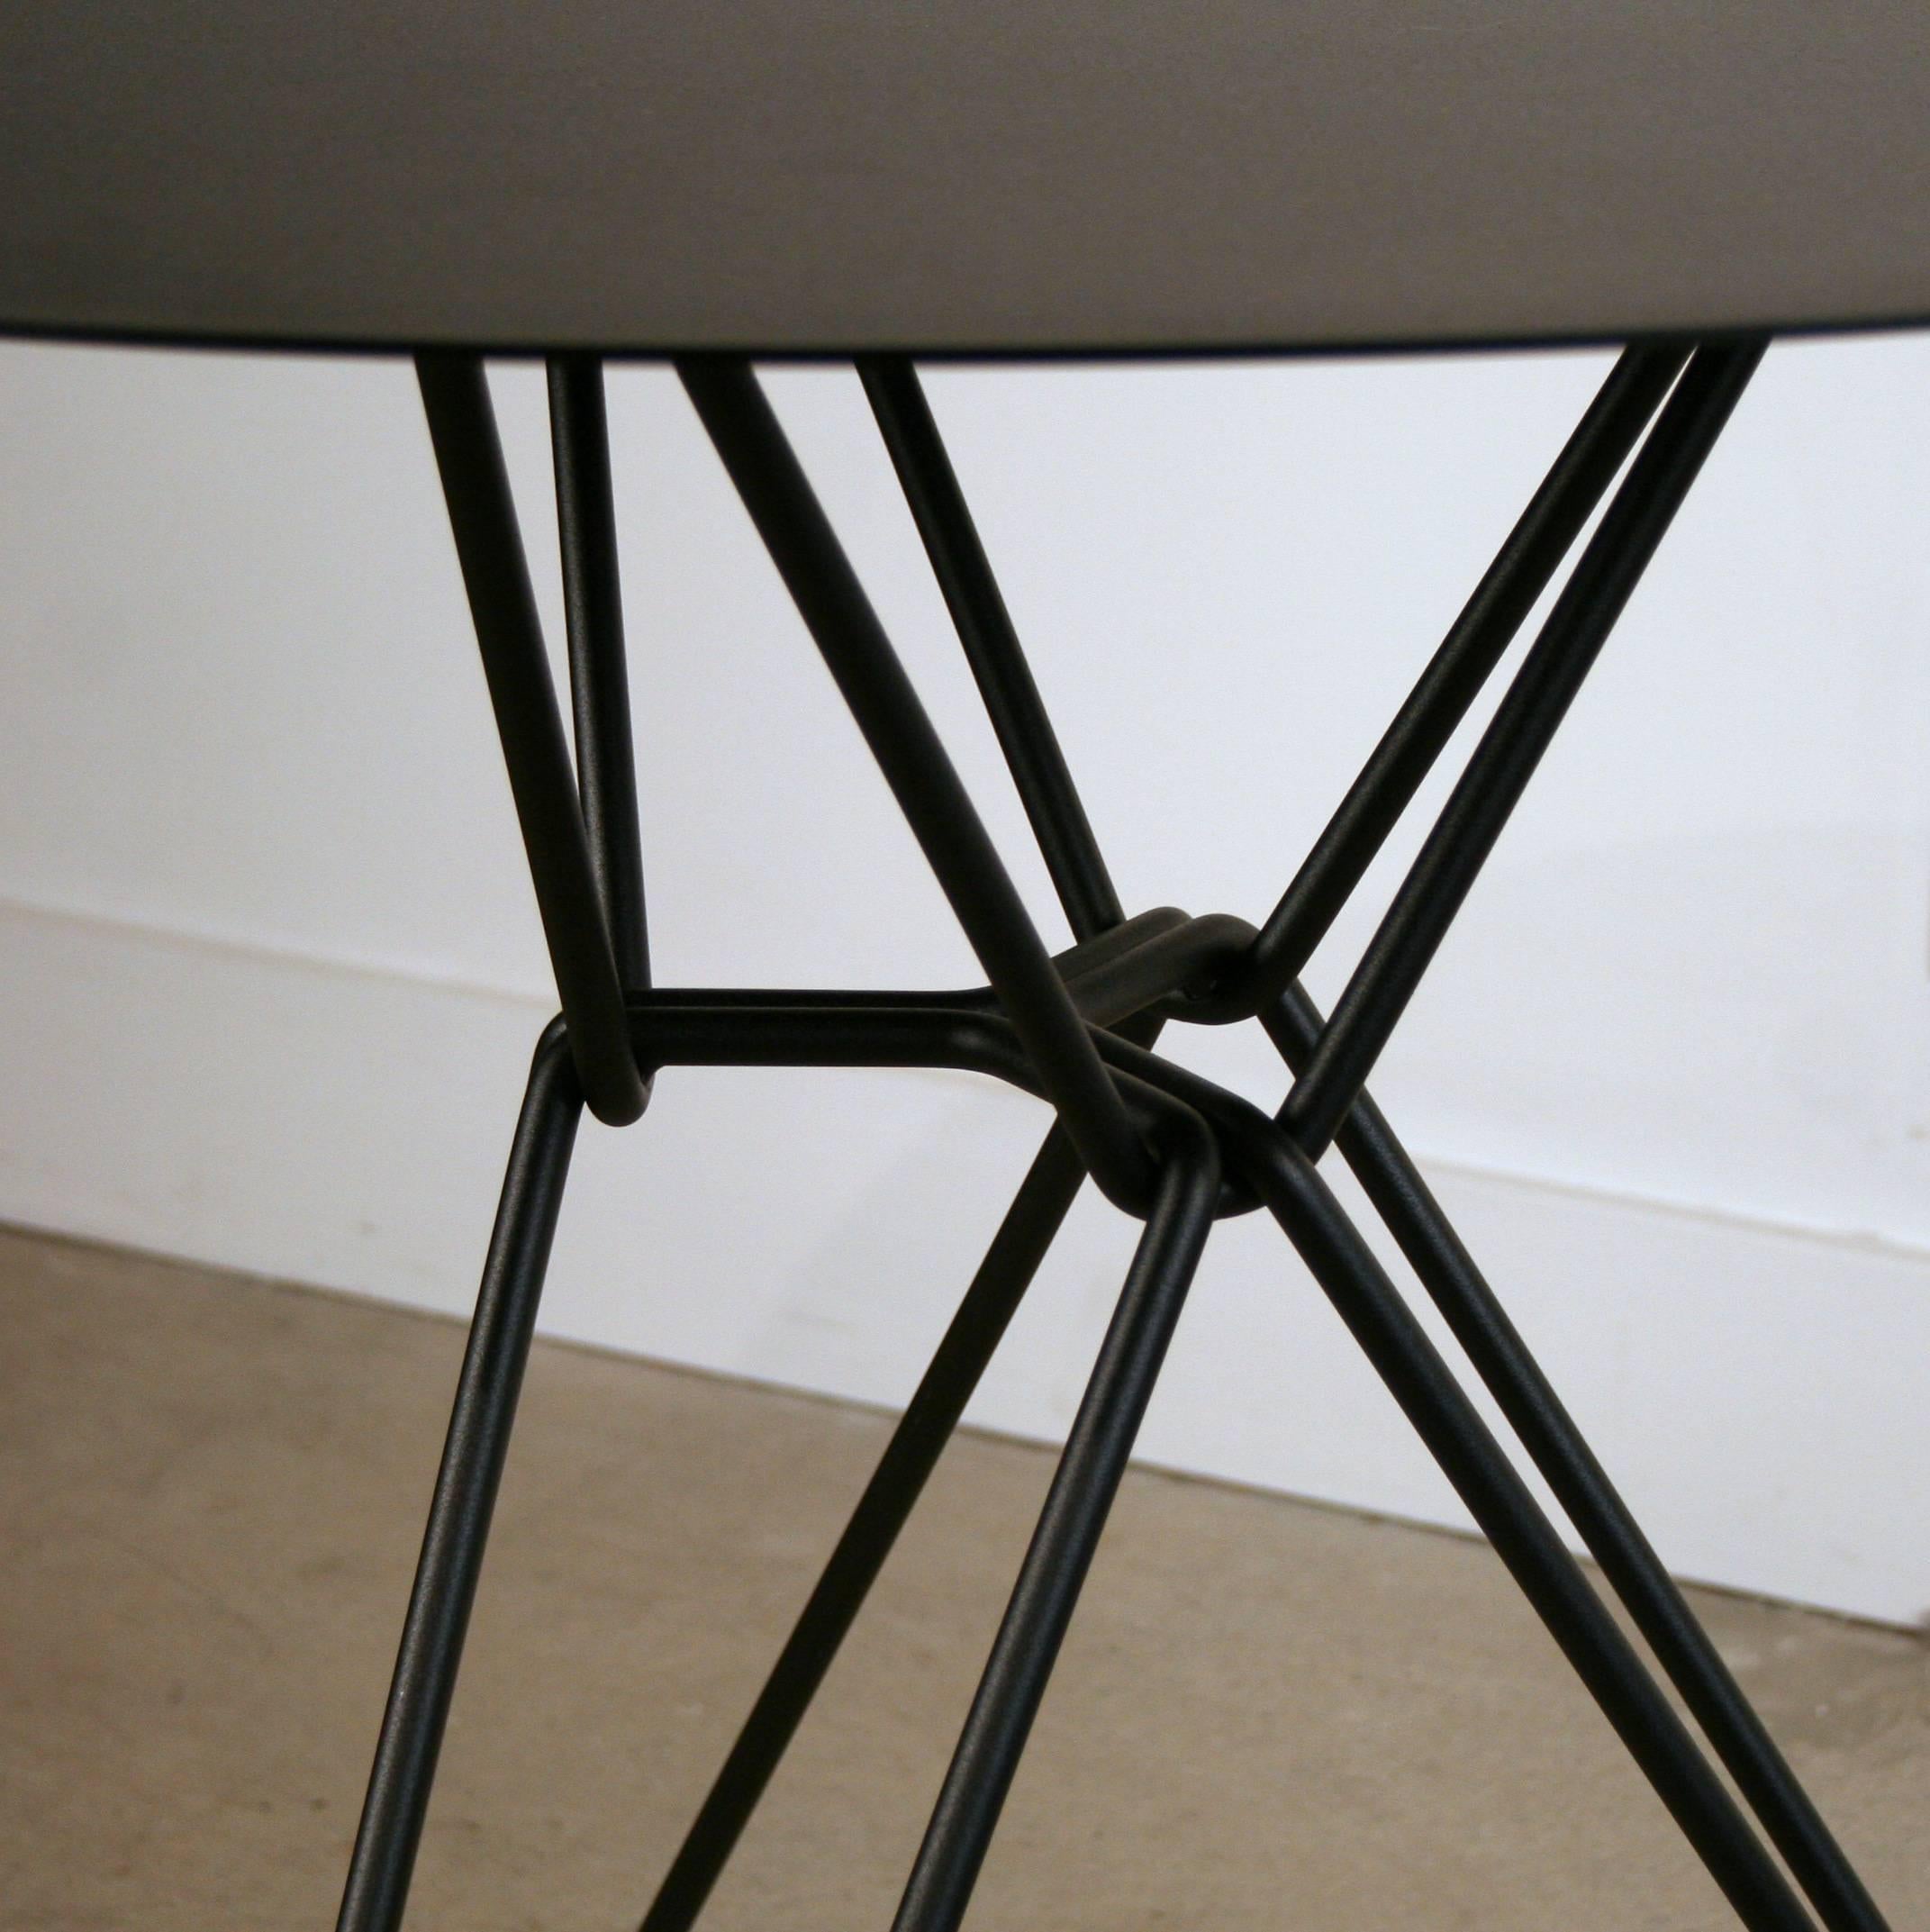 Tio Black Bistro Table In Excellent Condition For Sale In Vancouver, BC